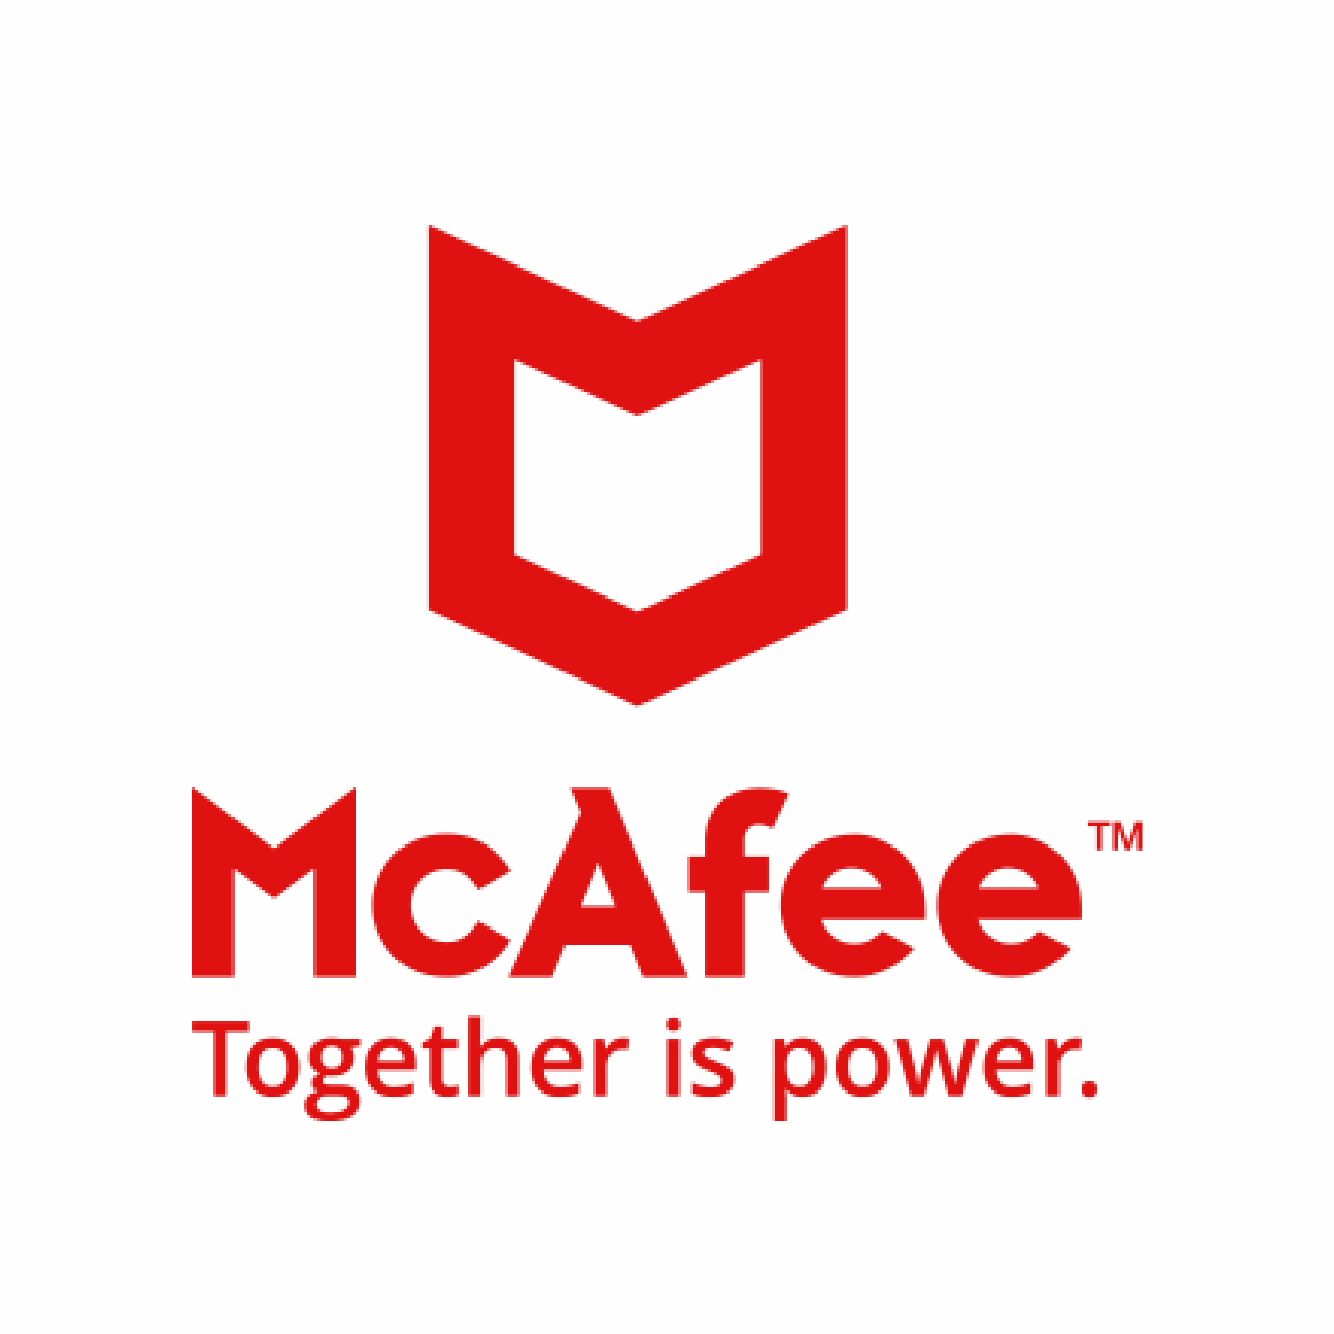 https://securetech.local/wp-content/uploads/2019/02/21.MCAFEE.AXIS_.png